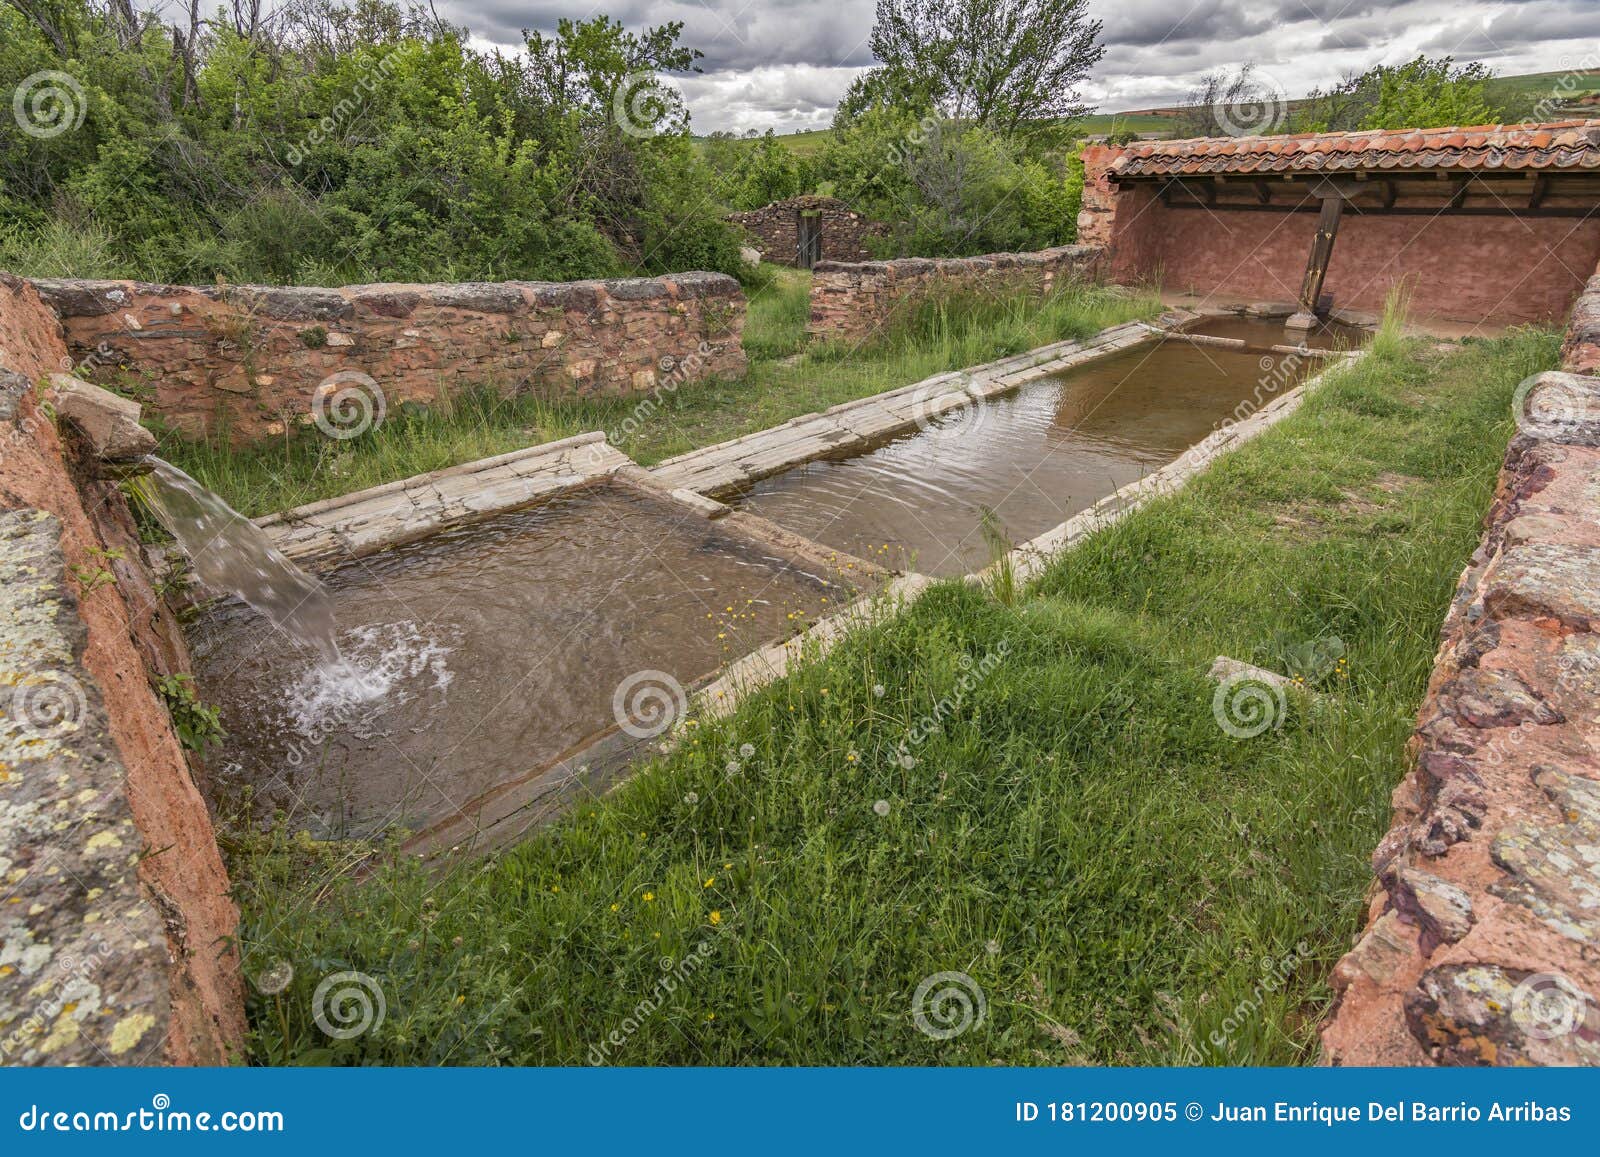 restored old buddle well preserved in madriguera red village in the province of segovia spain